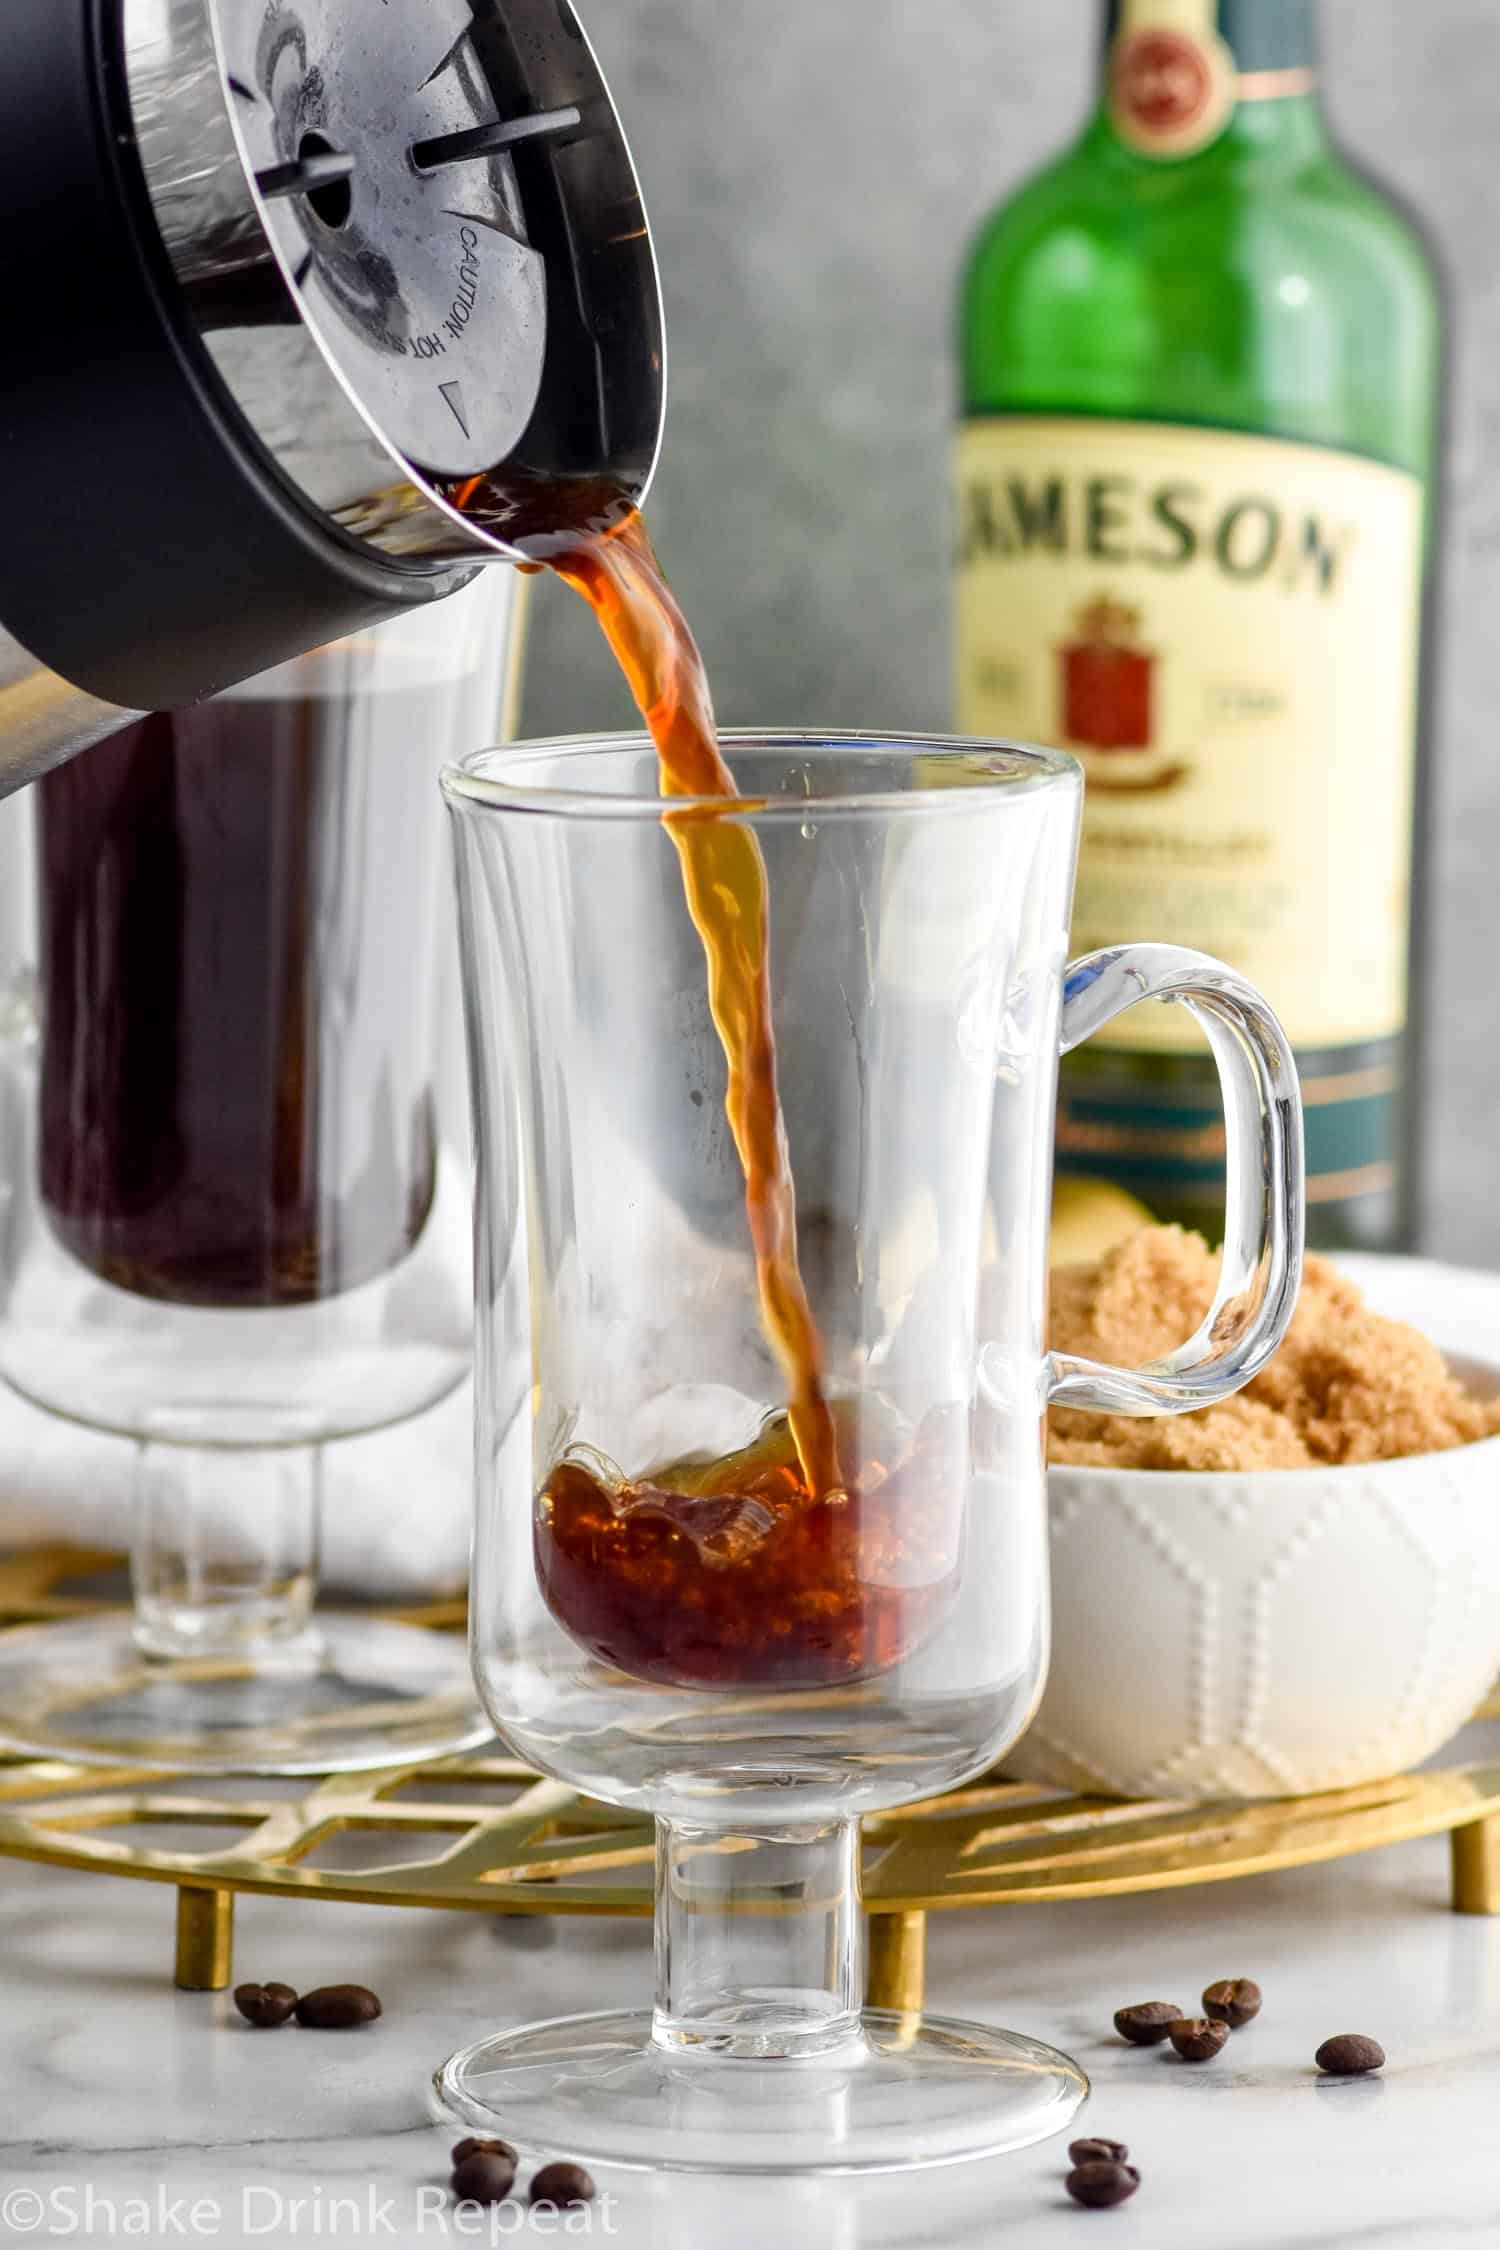 Photo of coffee being poured into a mug for Irish Coffee recipe. Bowl of brown sugar and a bottle of Jameson Irish Whiskey are in the background.